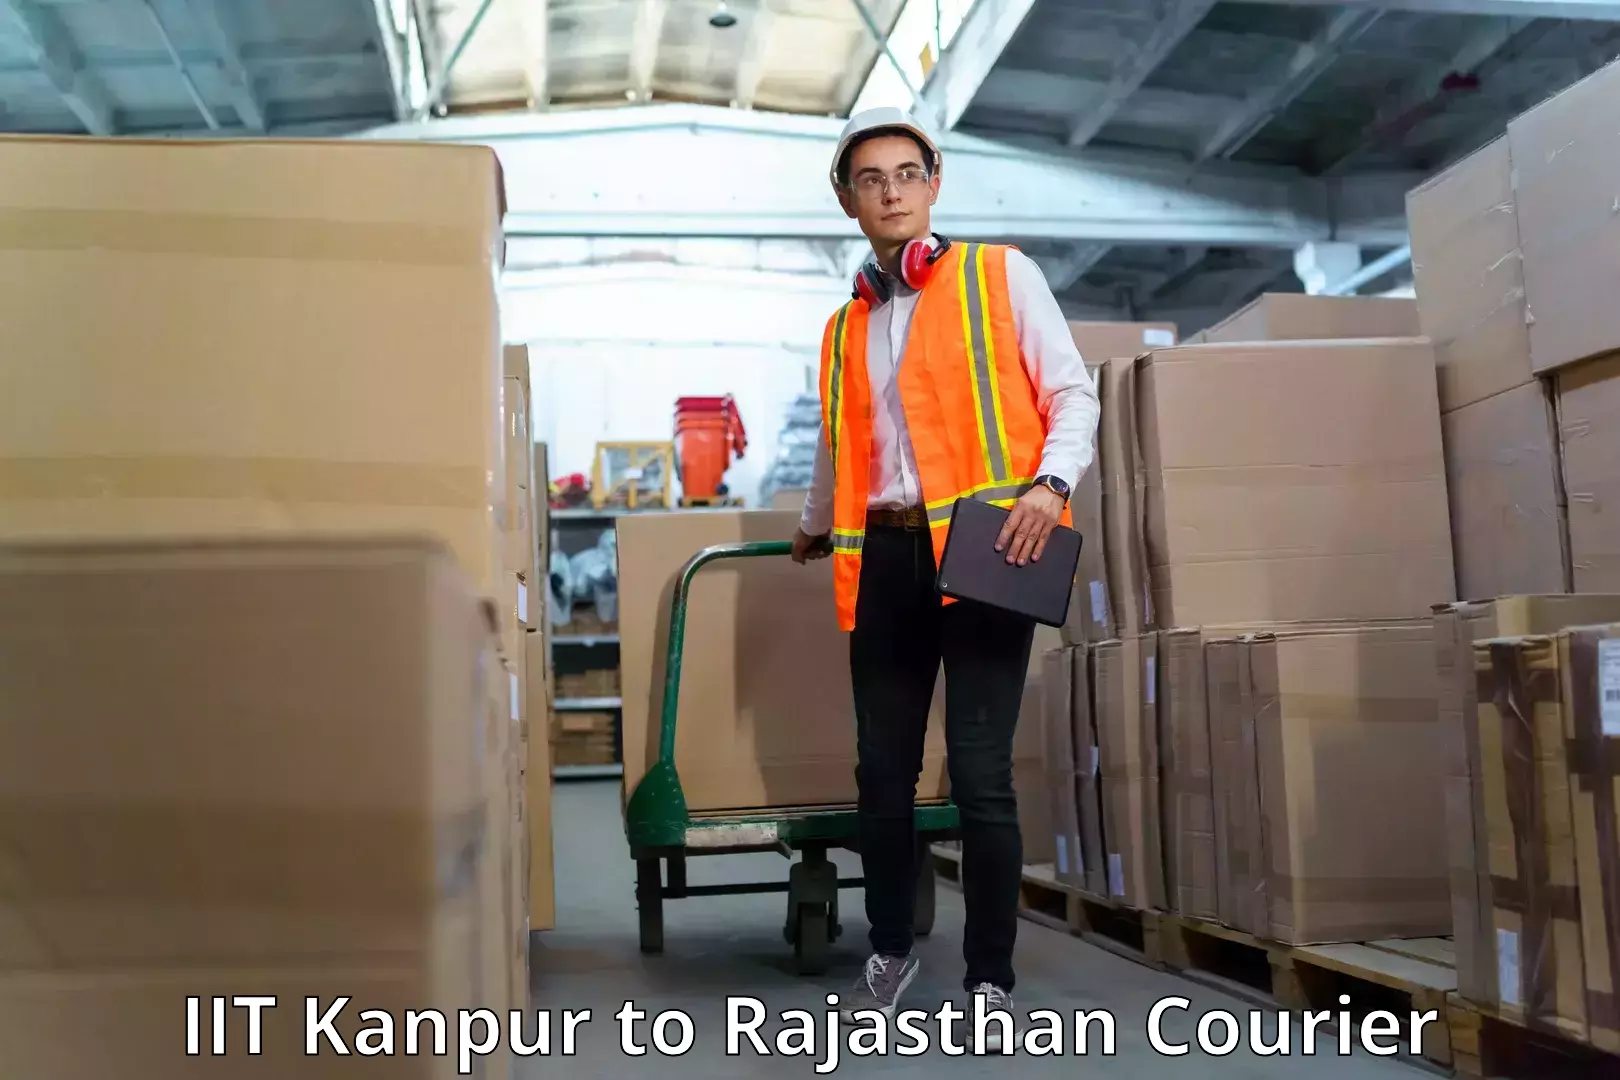 Affordable parcel service IIT Kanpur to Rajasthan